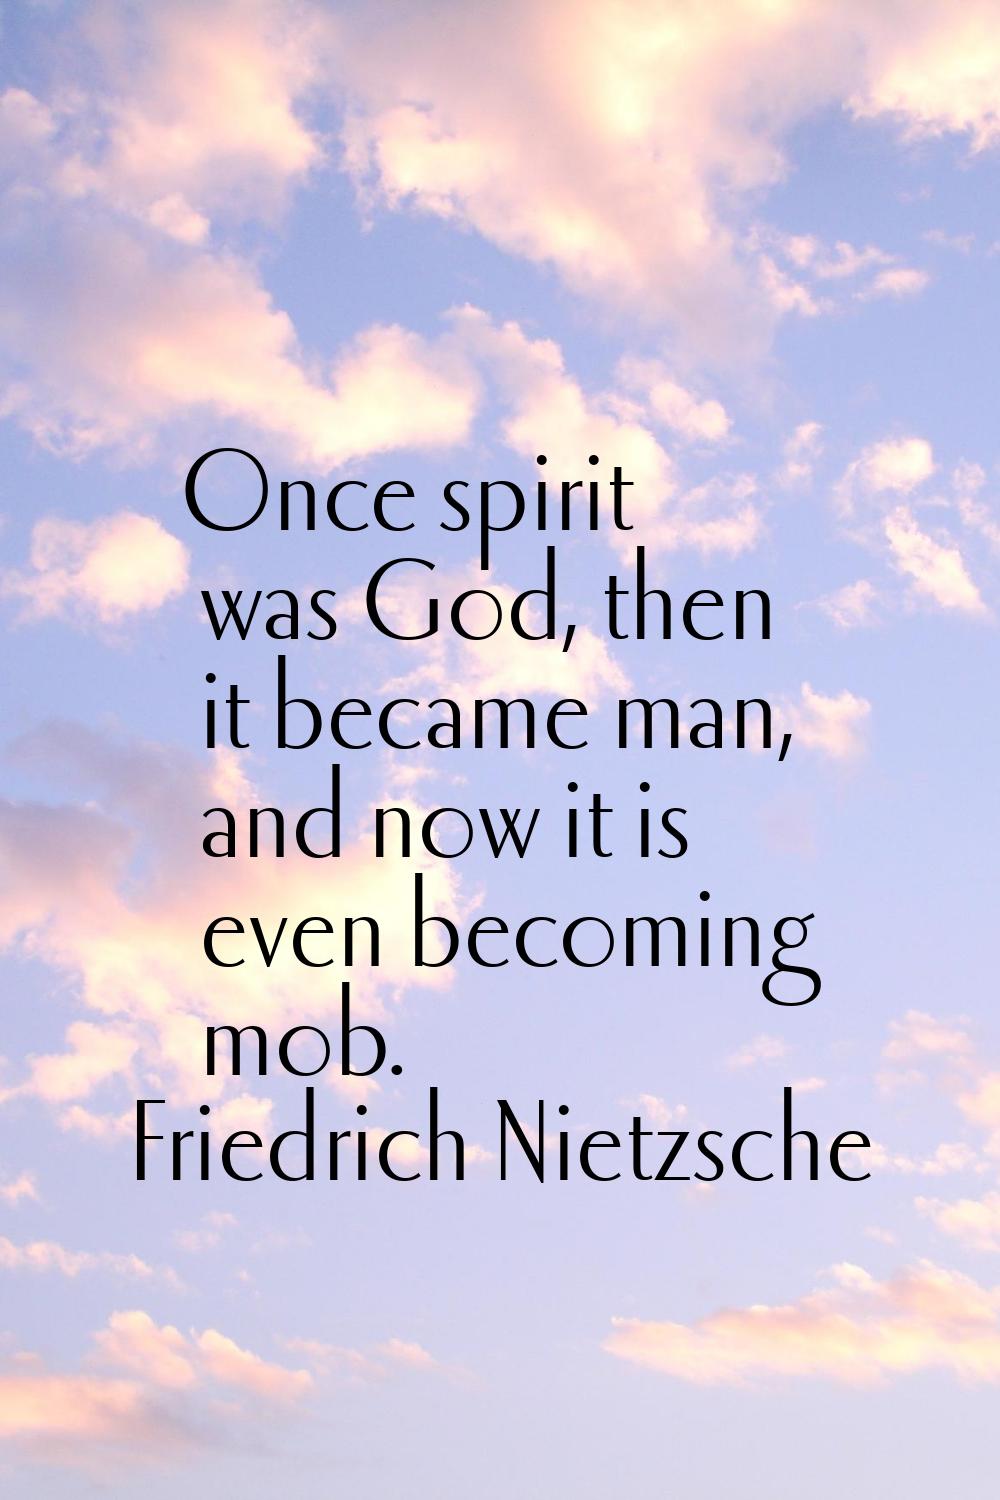 Once spirit was God, then it became man, and now it is even becoming mob.